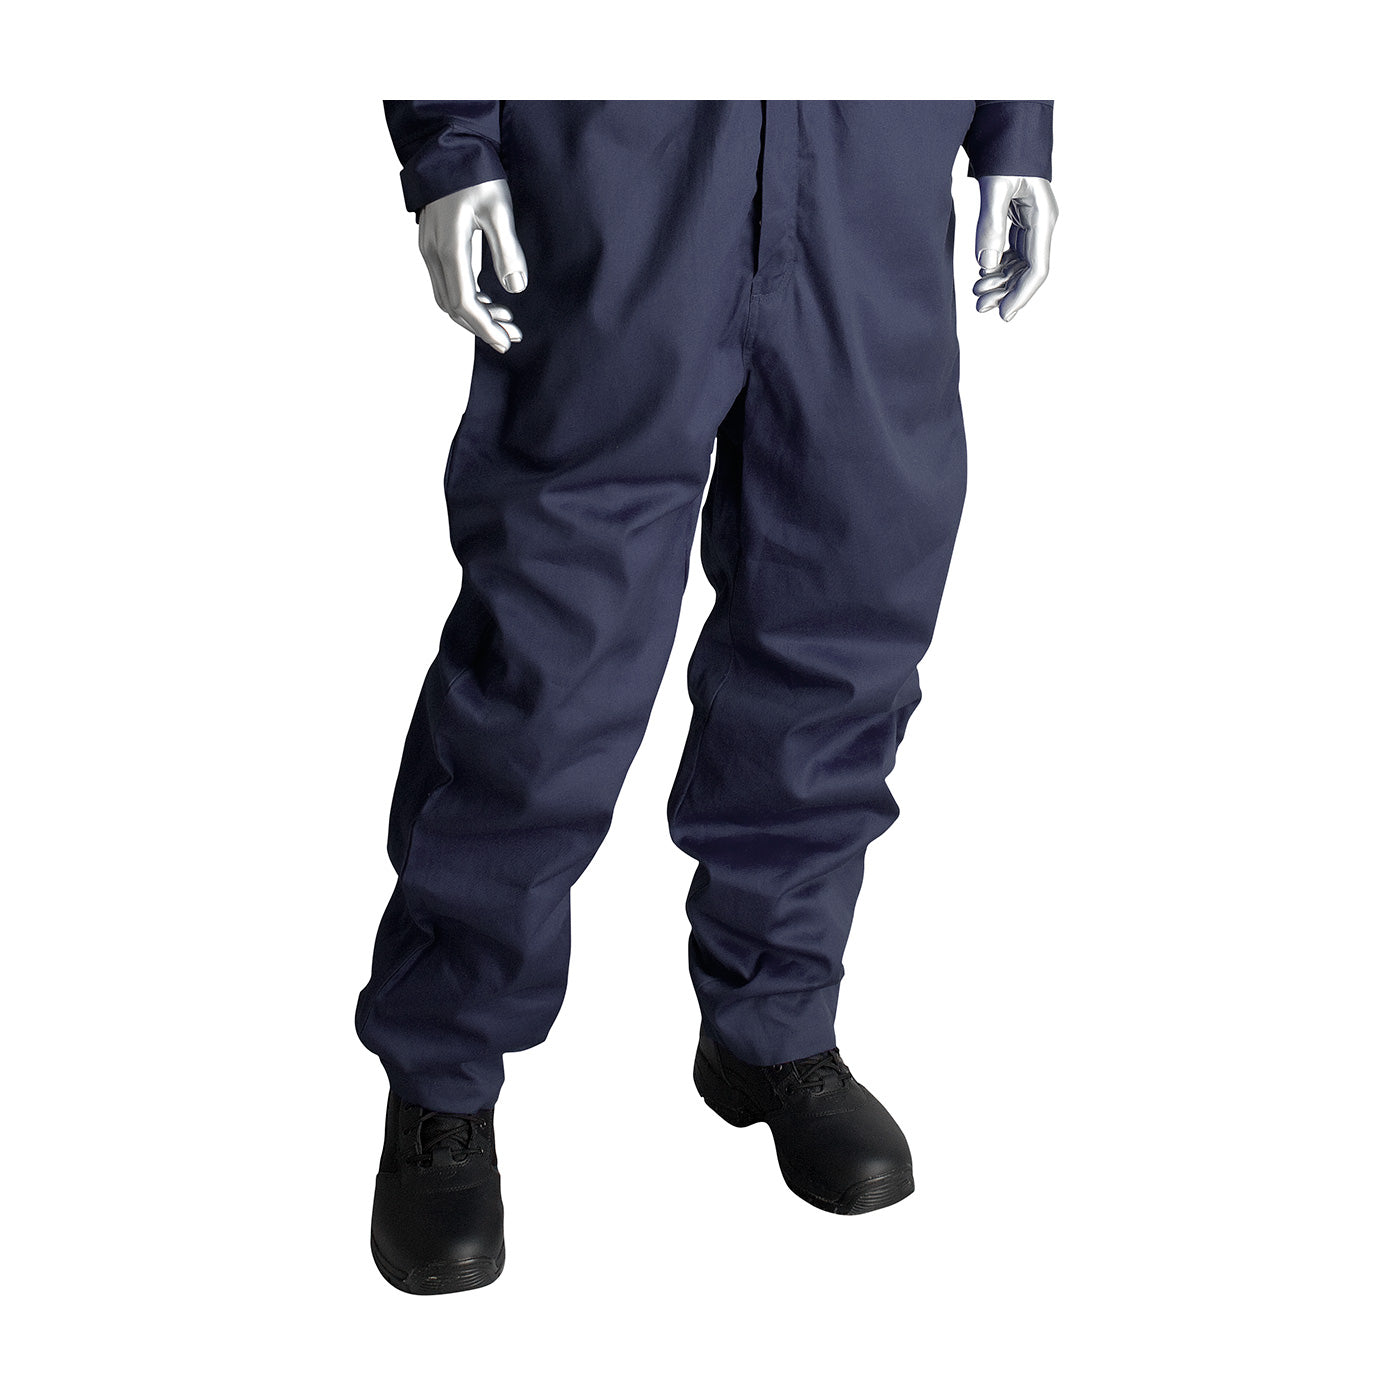 PIP 385-FRSC-KH/XL AR/FR Dual Certified Coverall with Zipper Closure - 9.2 Cal/cm2